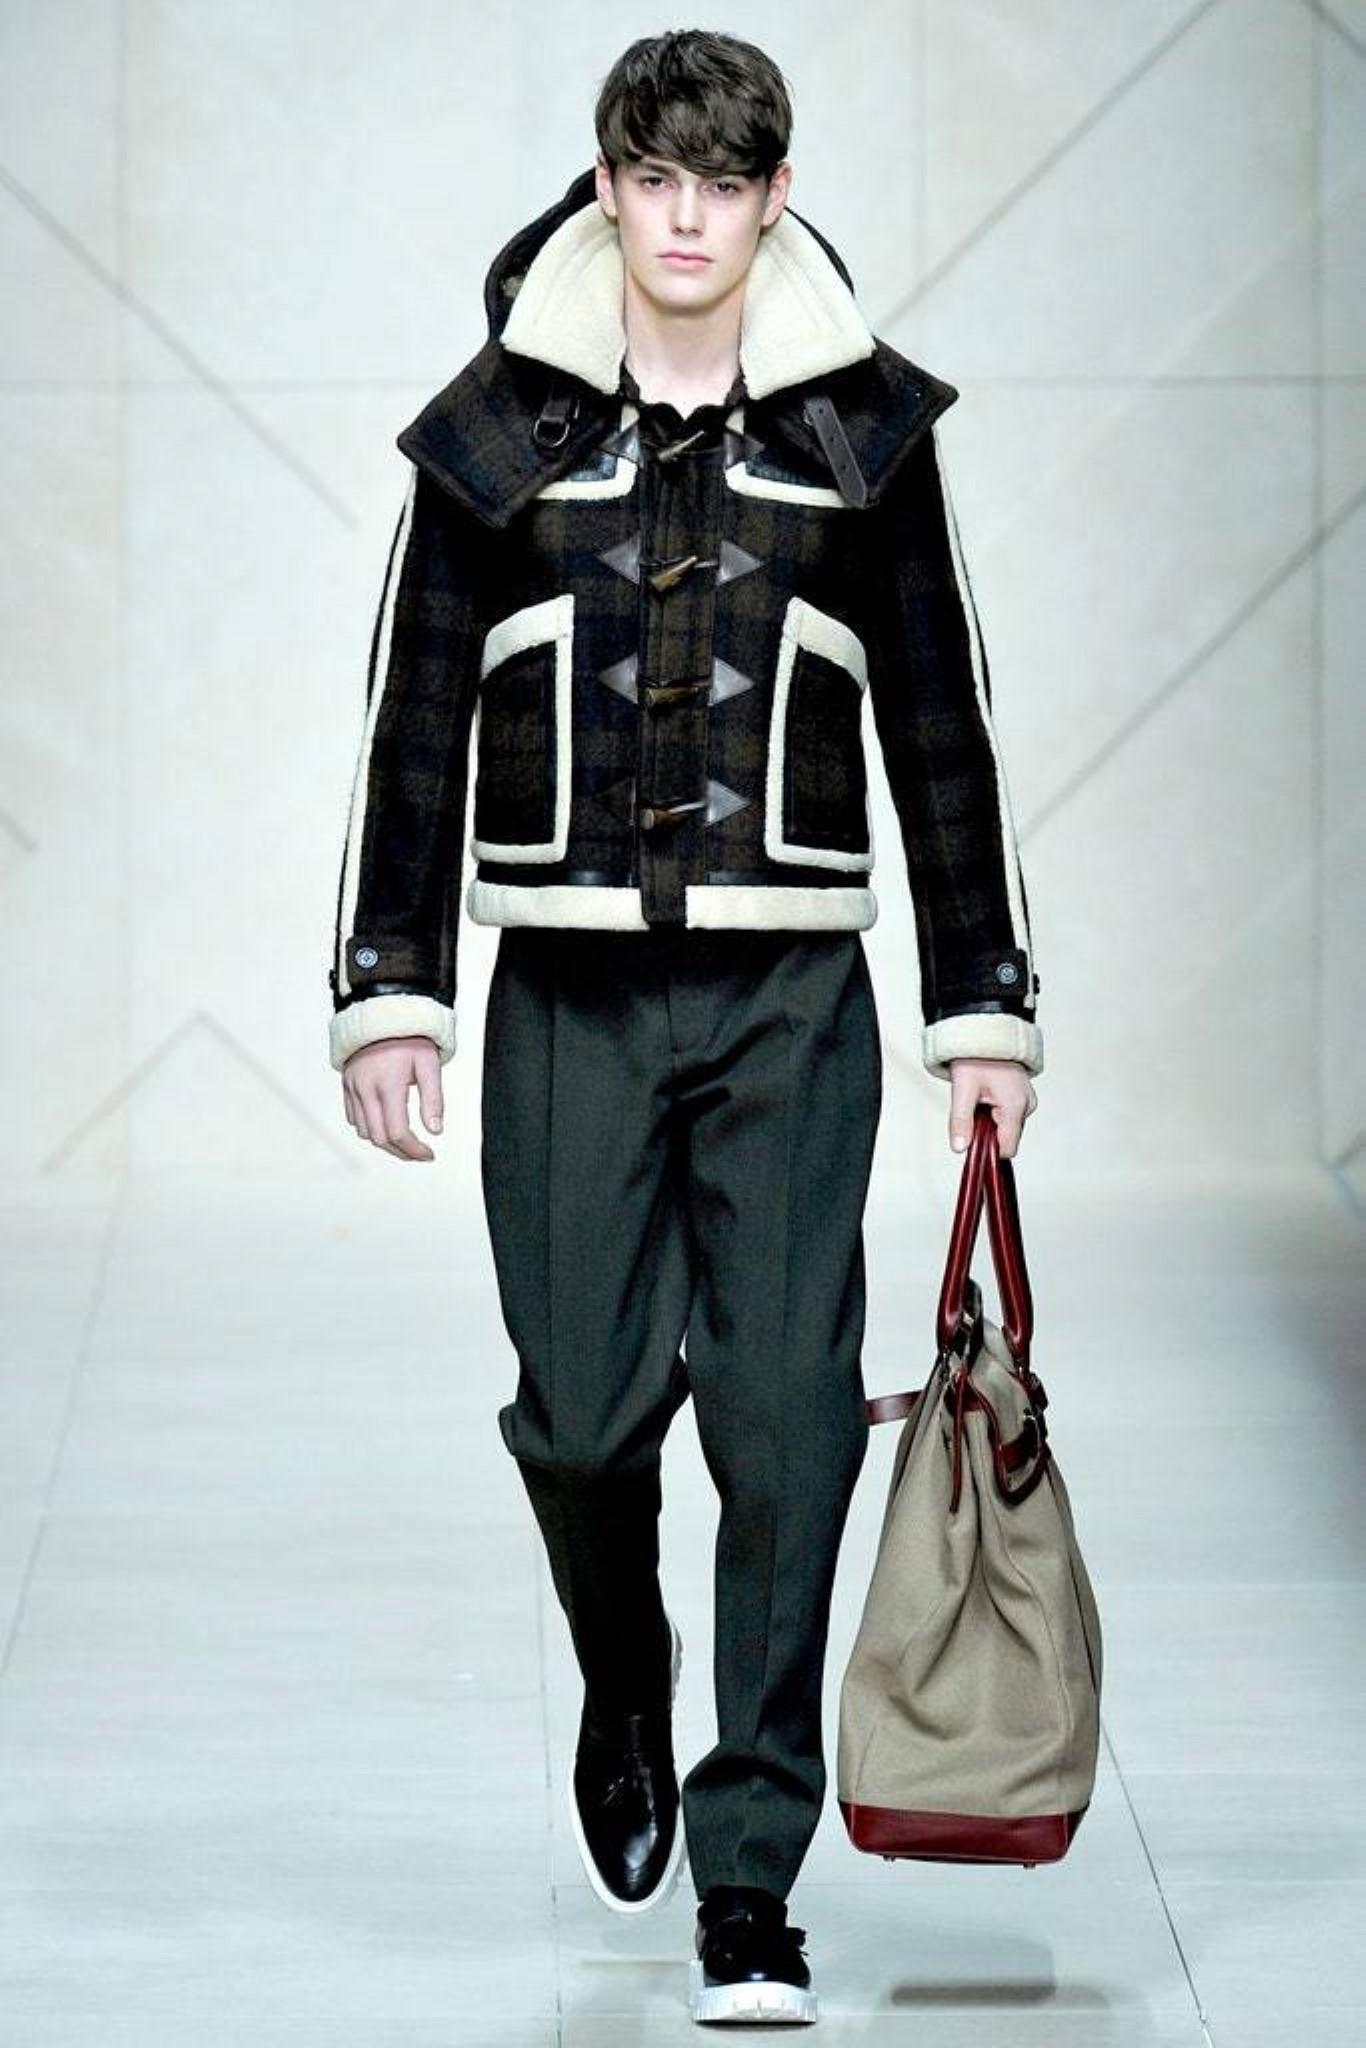 Burberry Prorsum Fall 2011 Brown Shearling Leather Trim Check Blouson Jacket by Christopher Bailey. Features Leather and shearling trim trace contrasting outlines, Colorblocking brown check with tonal leather details, Black lambskin and cream